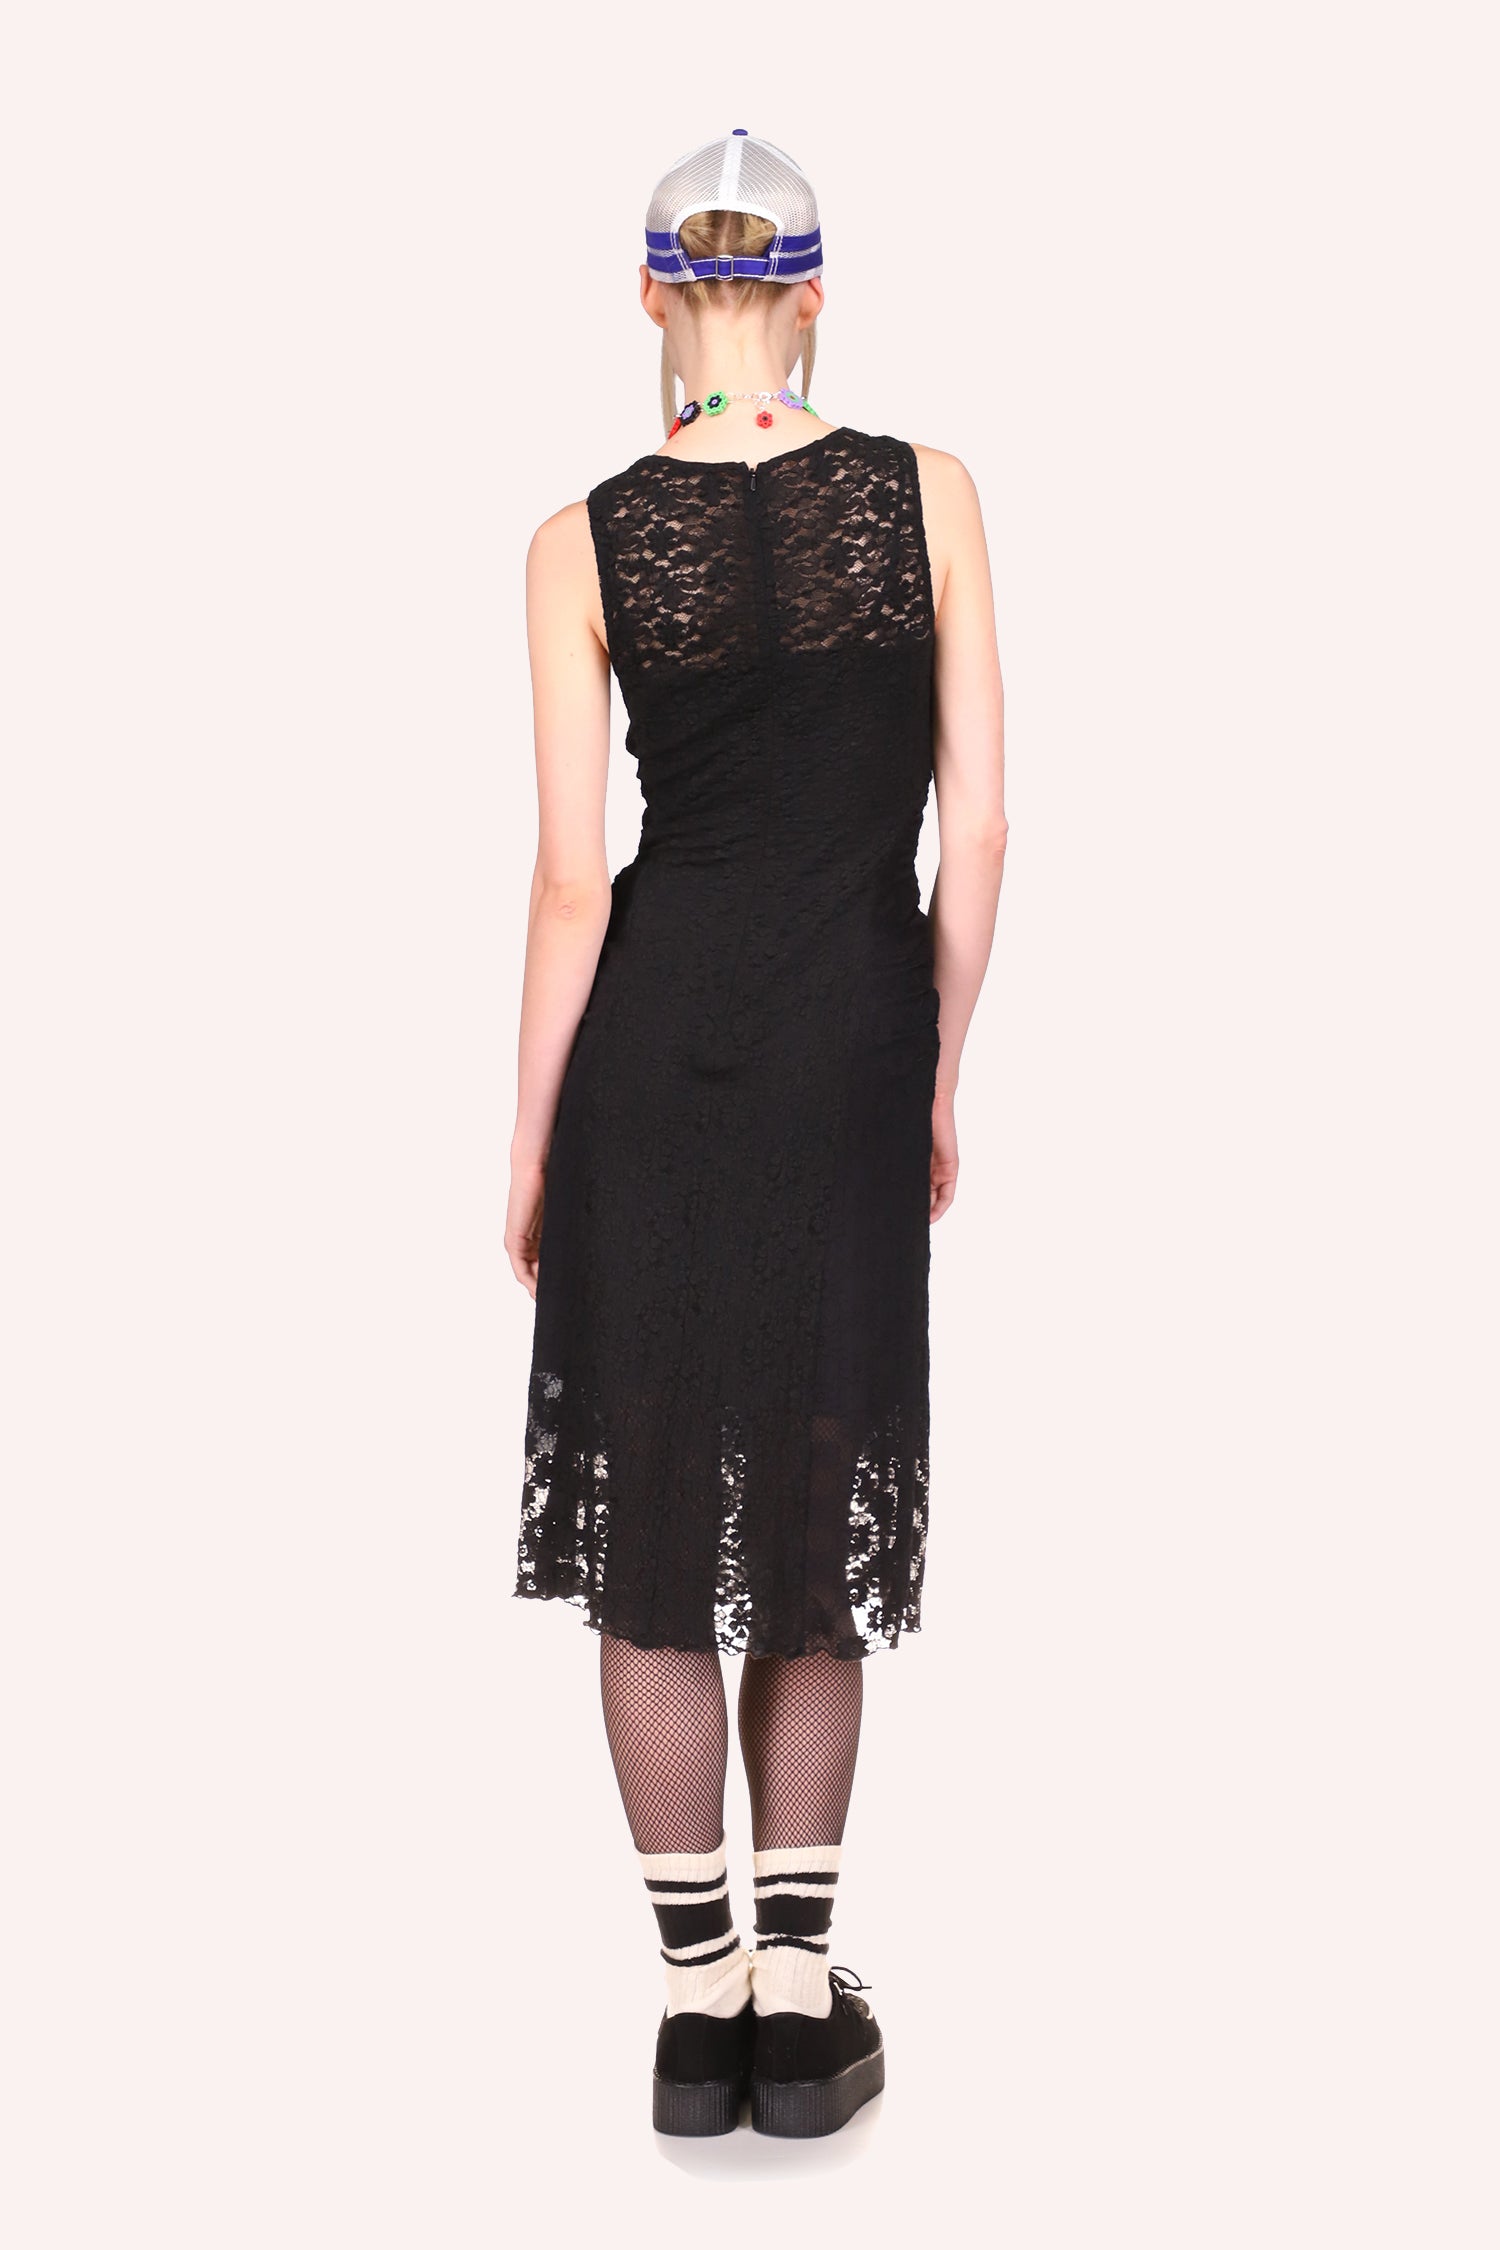 The Floral Stretch Lace Ruched Dress in black, come with zipper